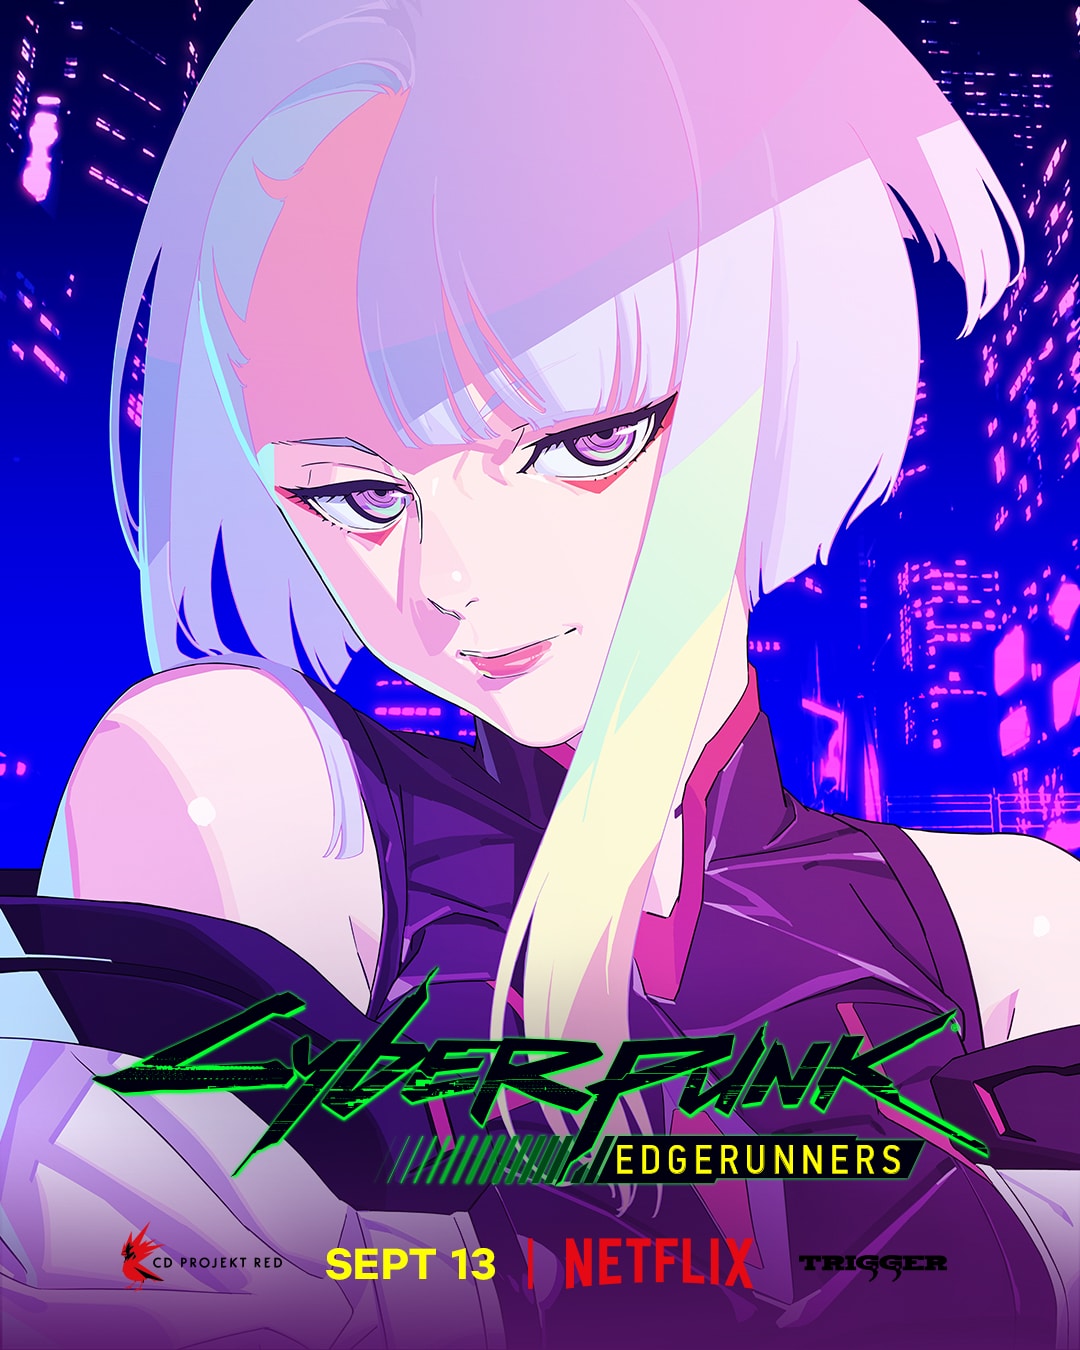 CD Projekt and Studio Trigger release a new trailer for Cyberpunk: Edgerunners  anime series